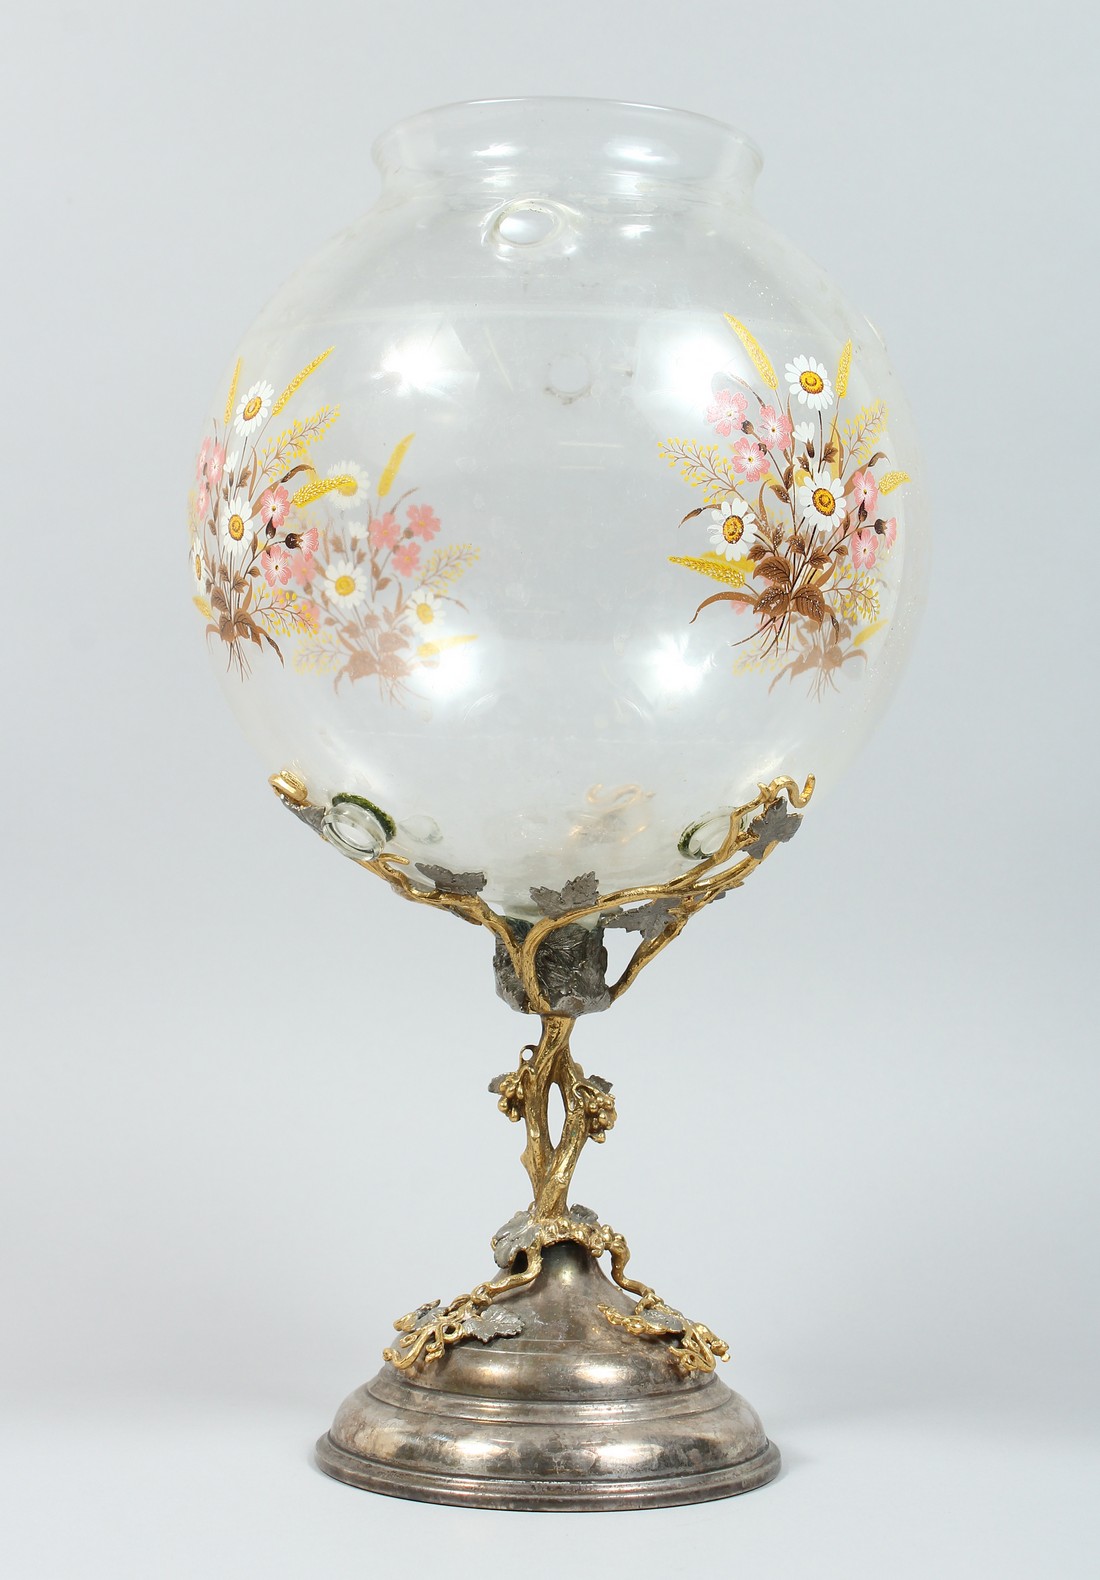 AN UNUSUAL SILVER PLATED ORMOLU AND GLASS PEDESTAL BOWL, the bowl decorated with flowers on a